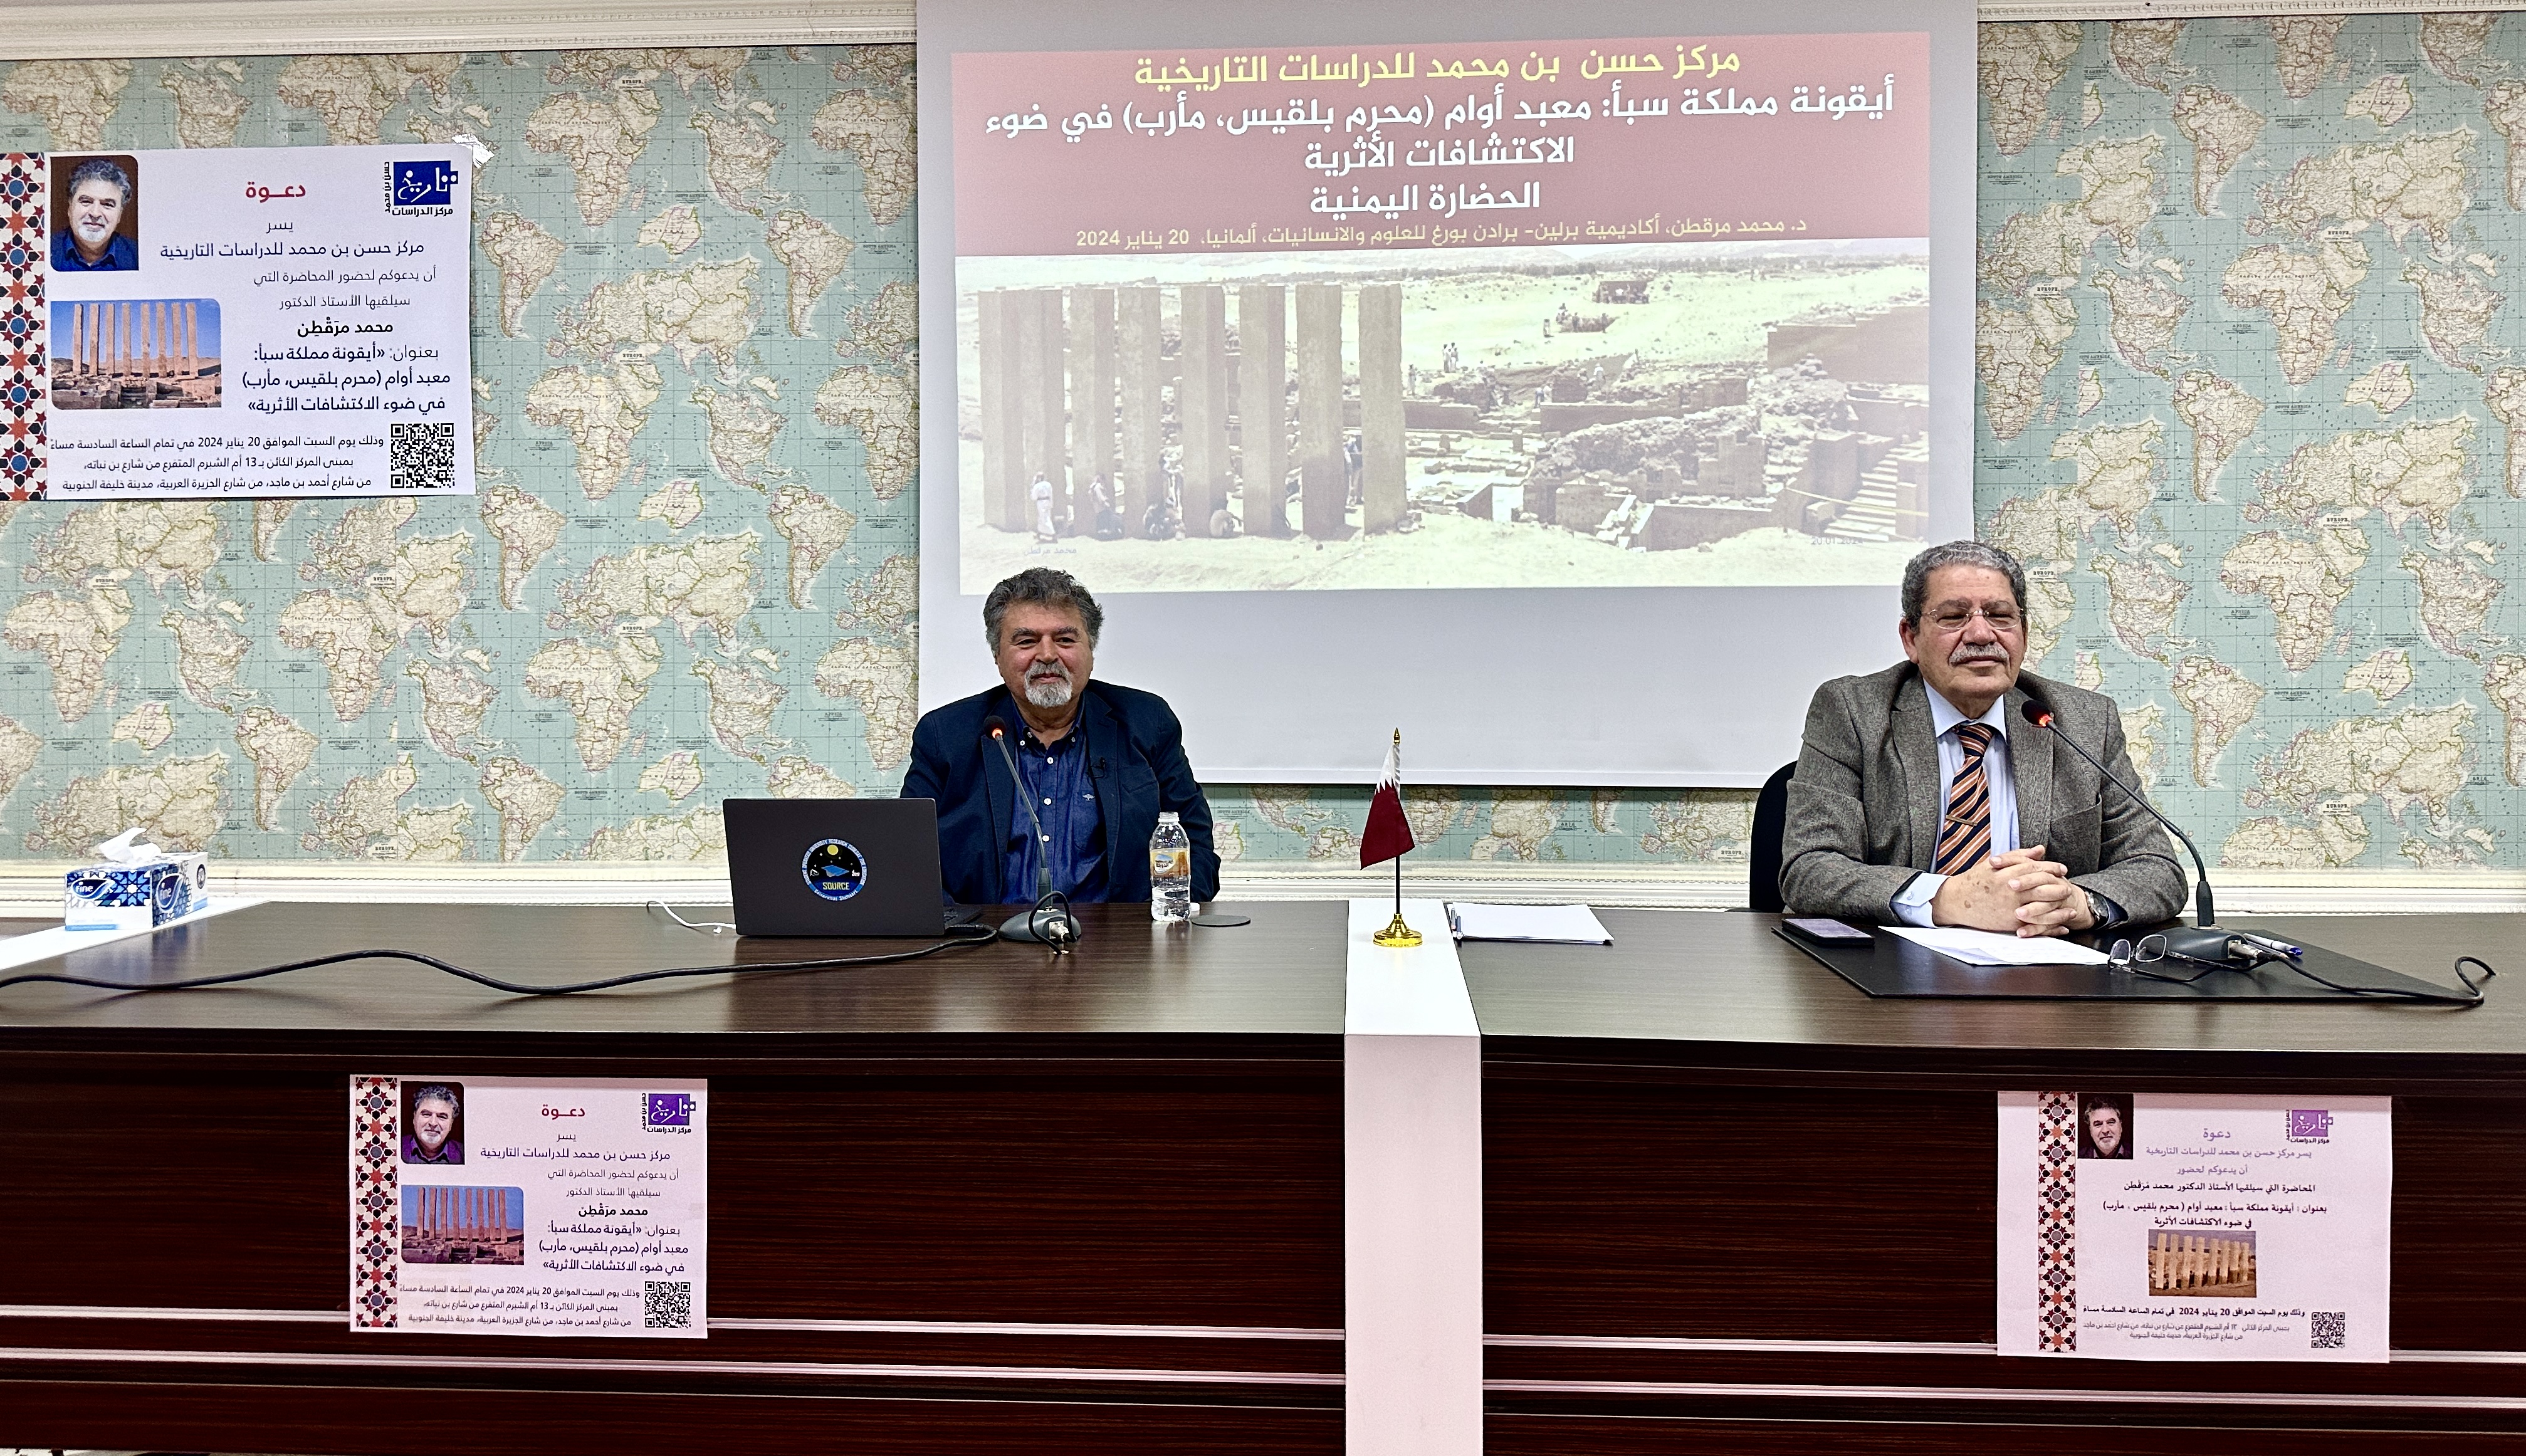 The Center organizes a symposium on the Awam Temple considering archaeological discoveries.